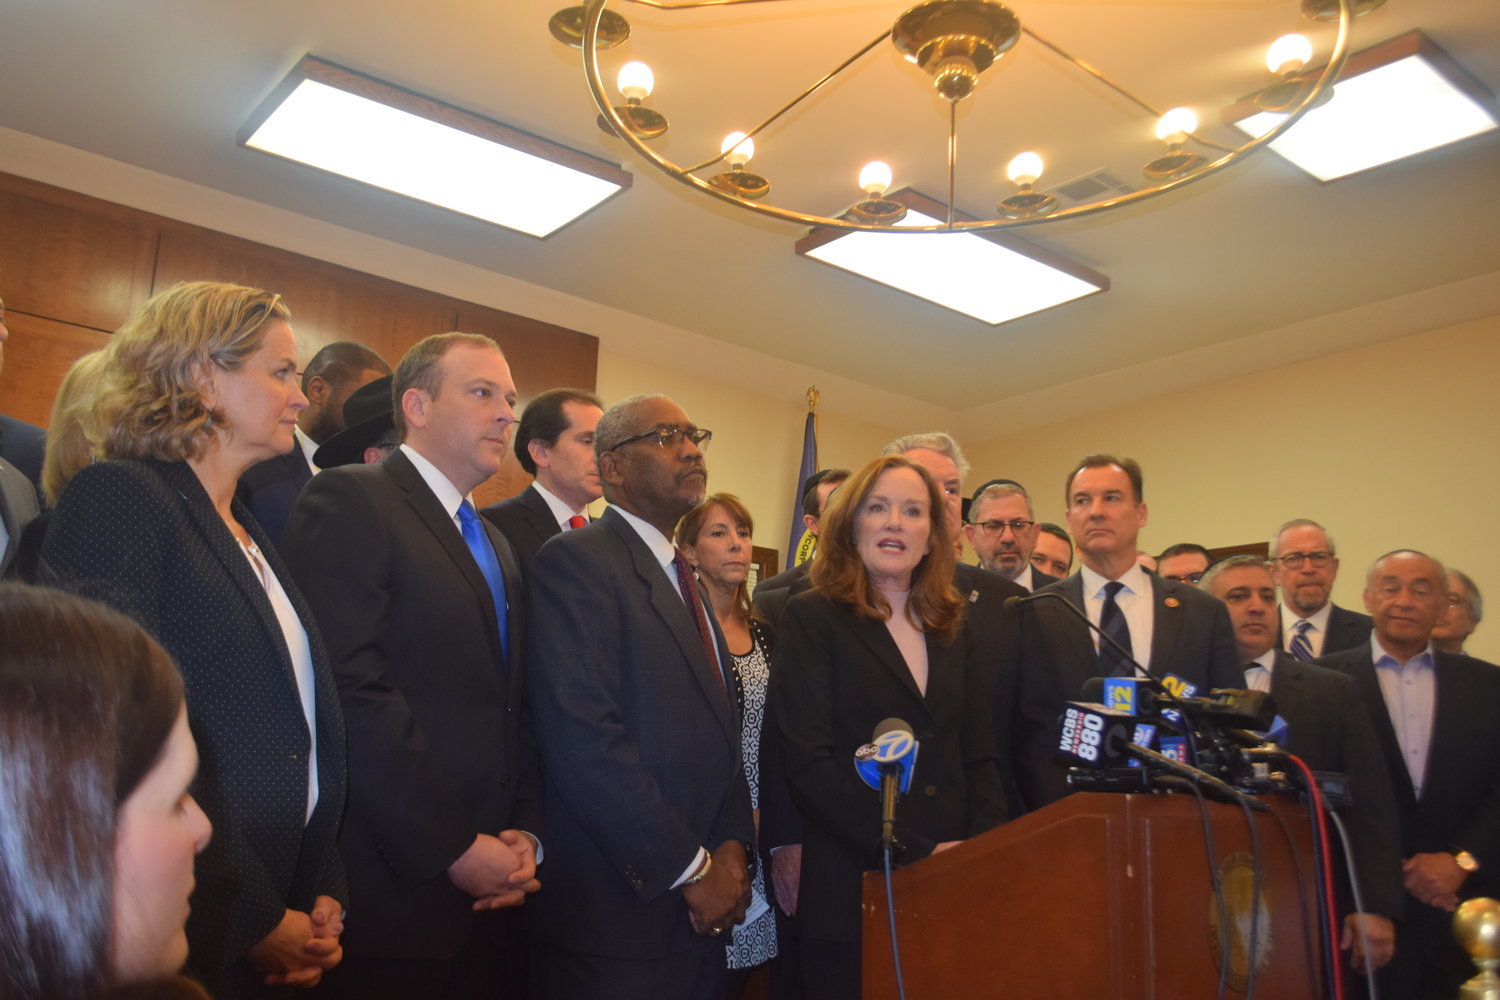 Elected officials and religious leaders gathered on Jan. 3 to denounce acts of anti-Semitism that plagued New York last month.